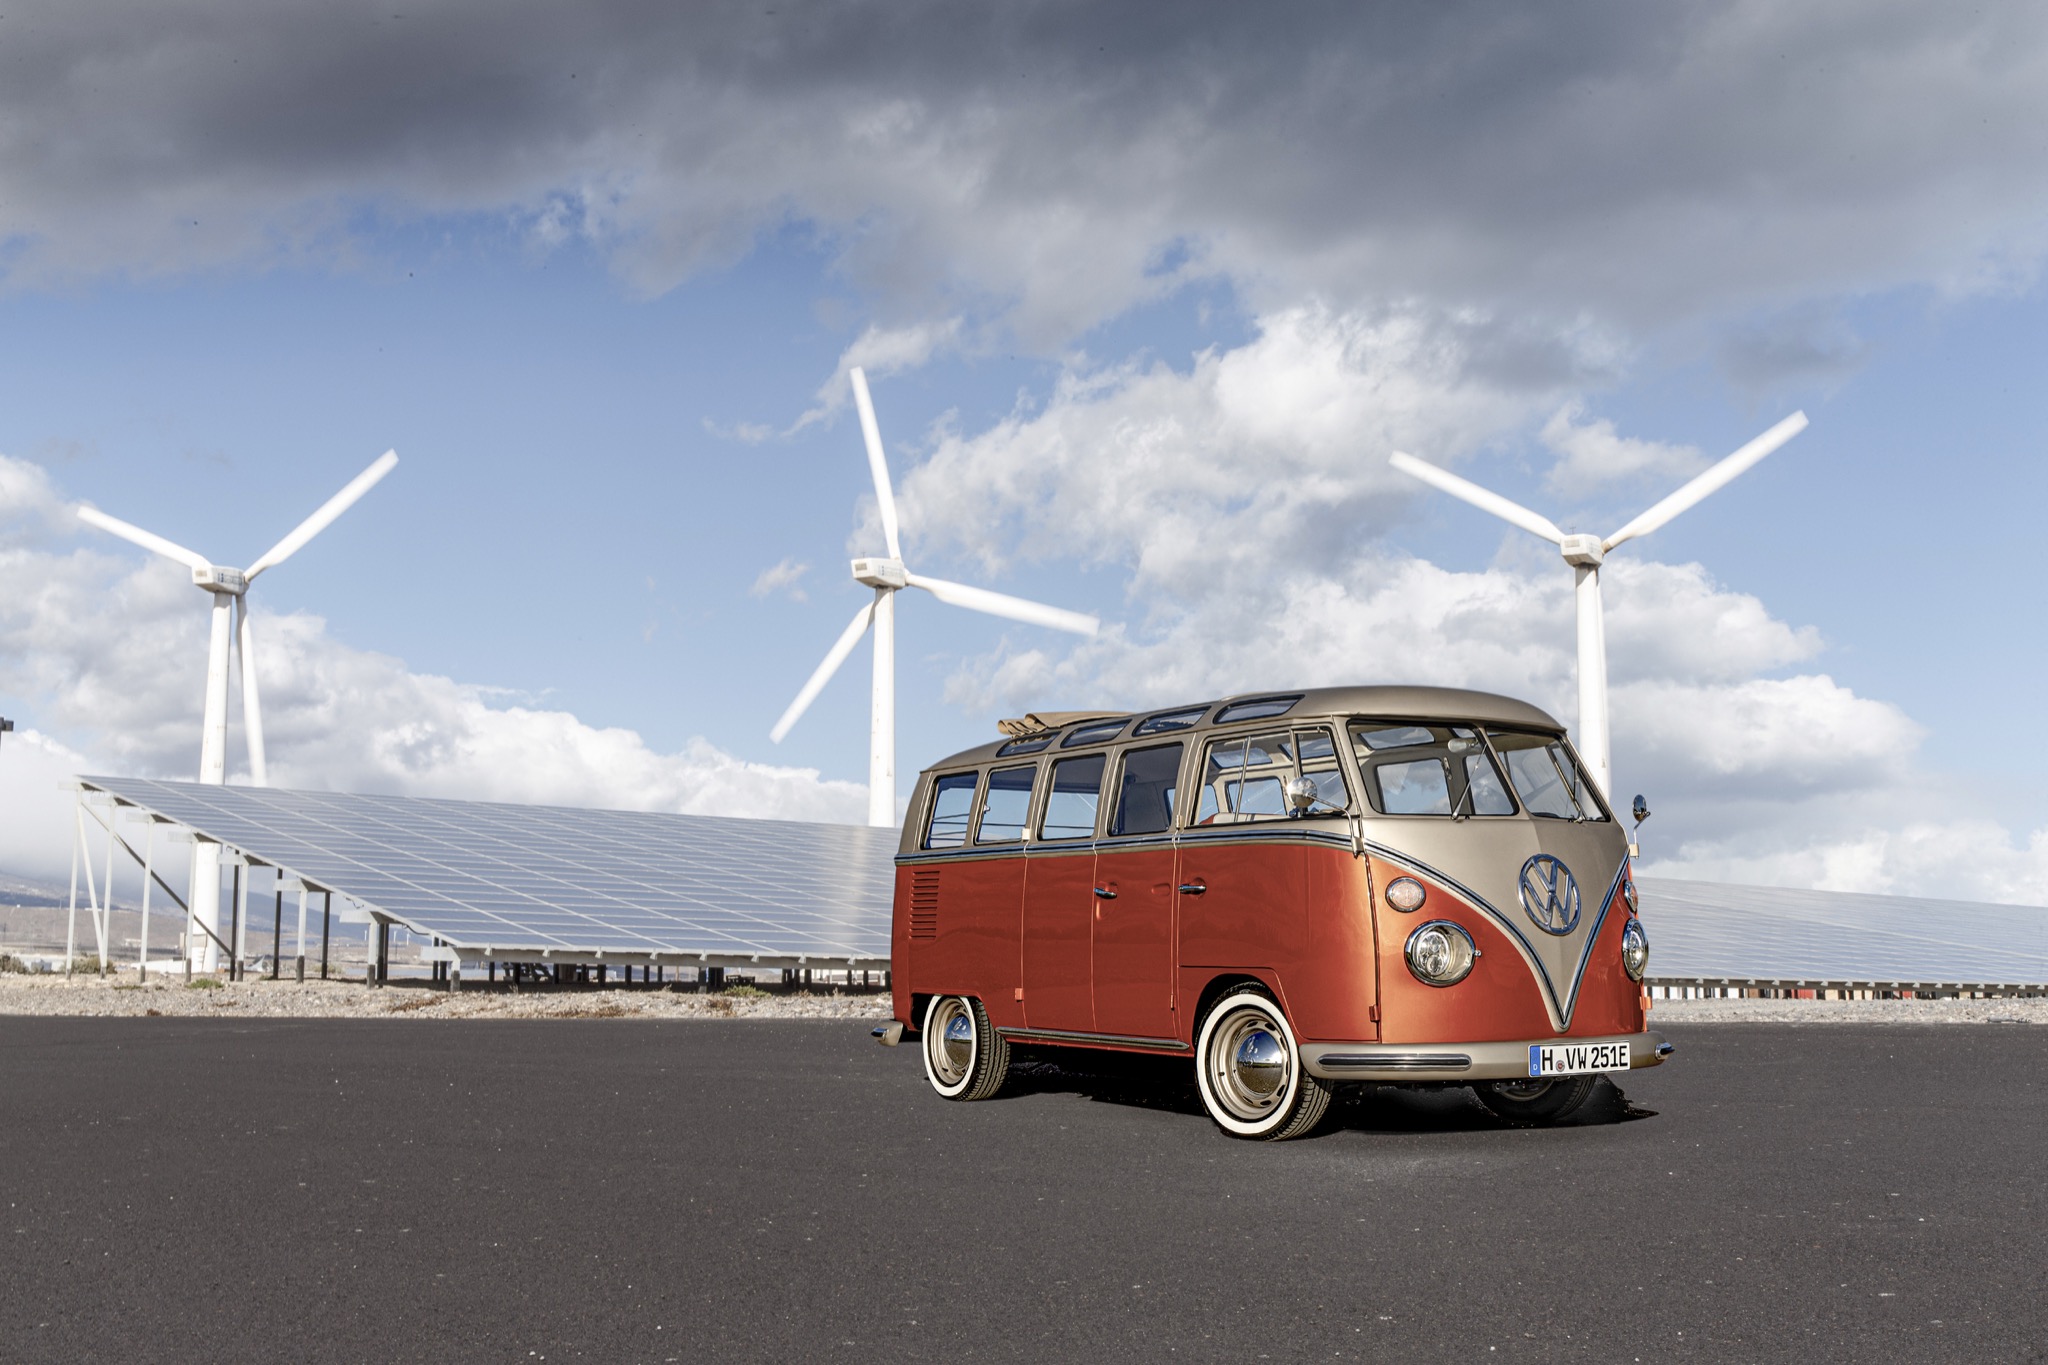 This is the Volkswagen e-BULLI, an official electric bus restomod